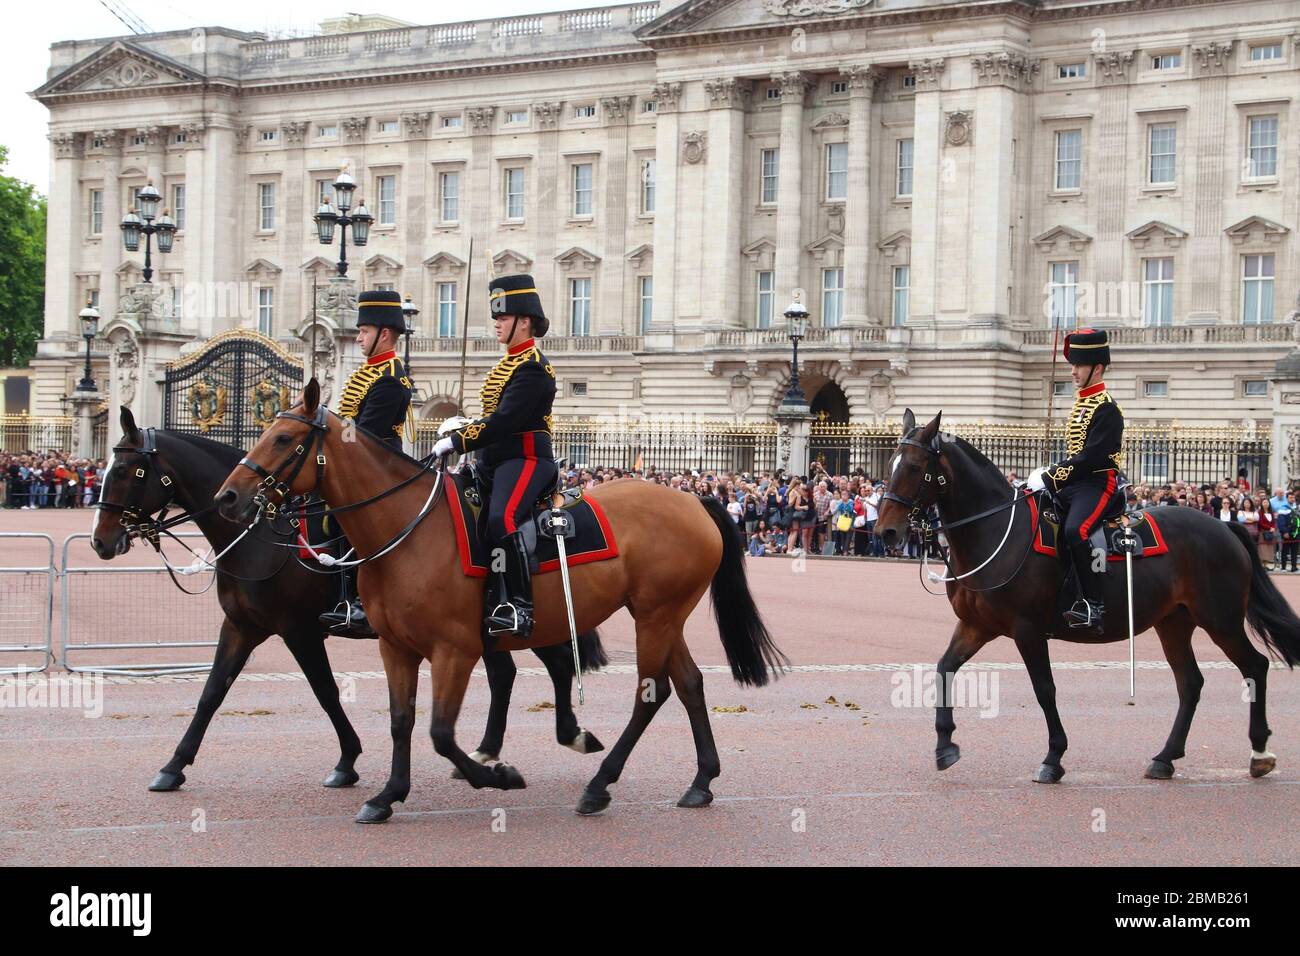 LONDON, UK - JULY 15, 2019: Horse Guards during change of guard ceremony in front of Buckingham Palace, London. Stock Photo